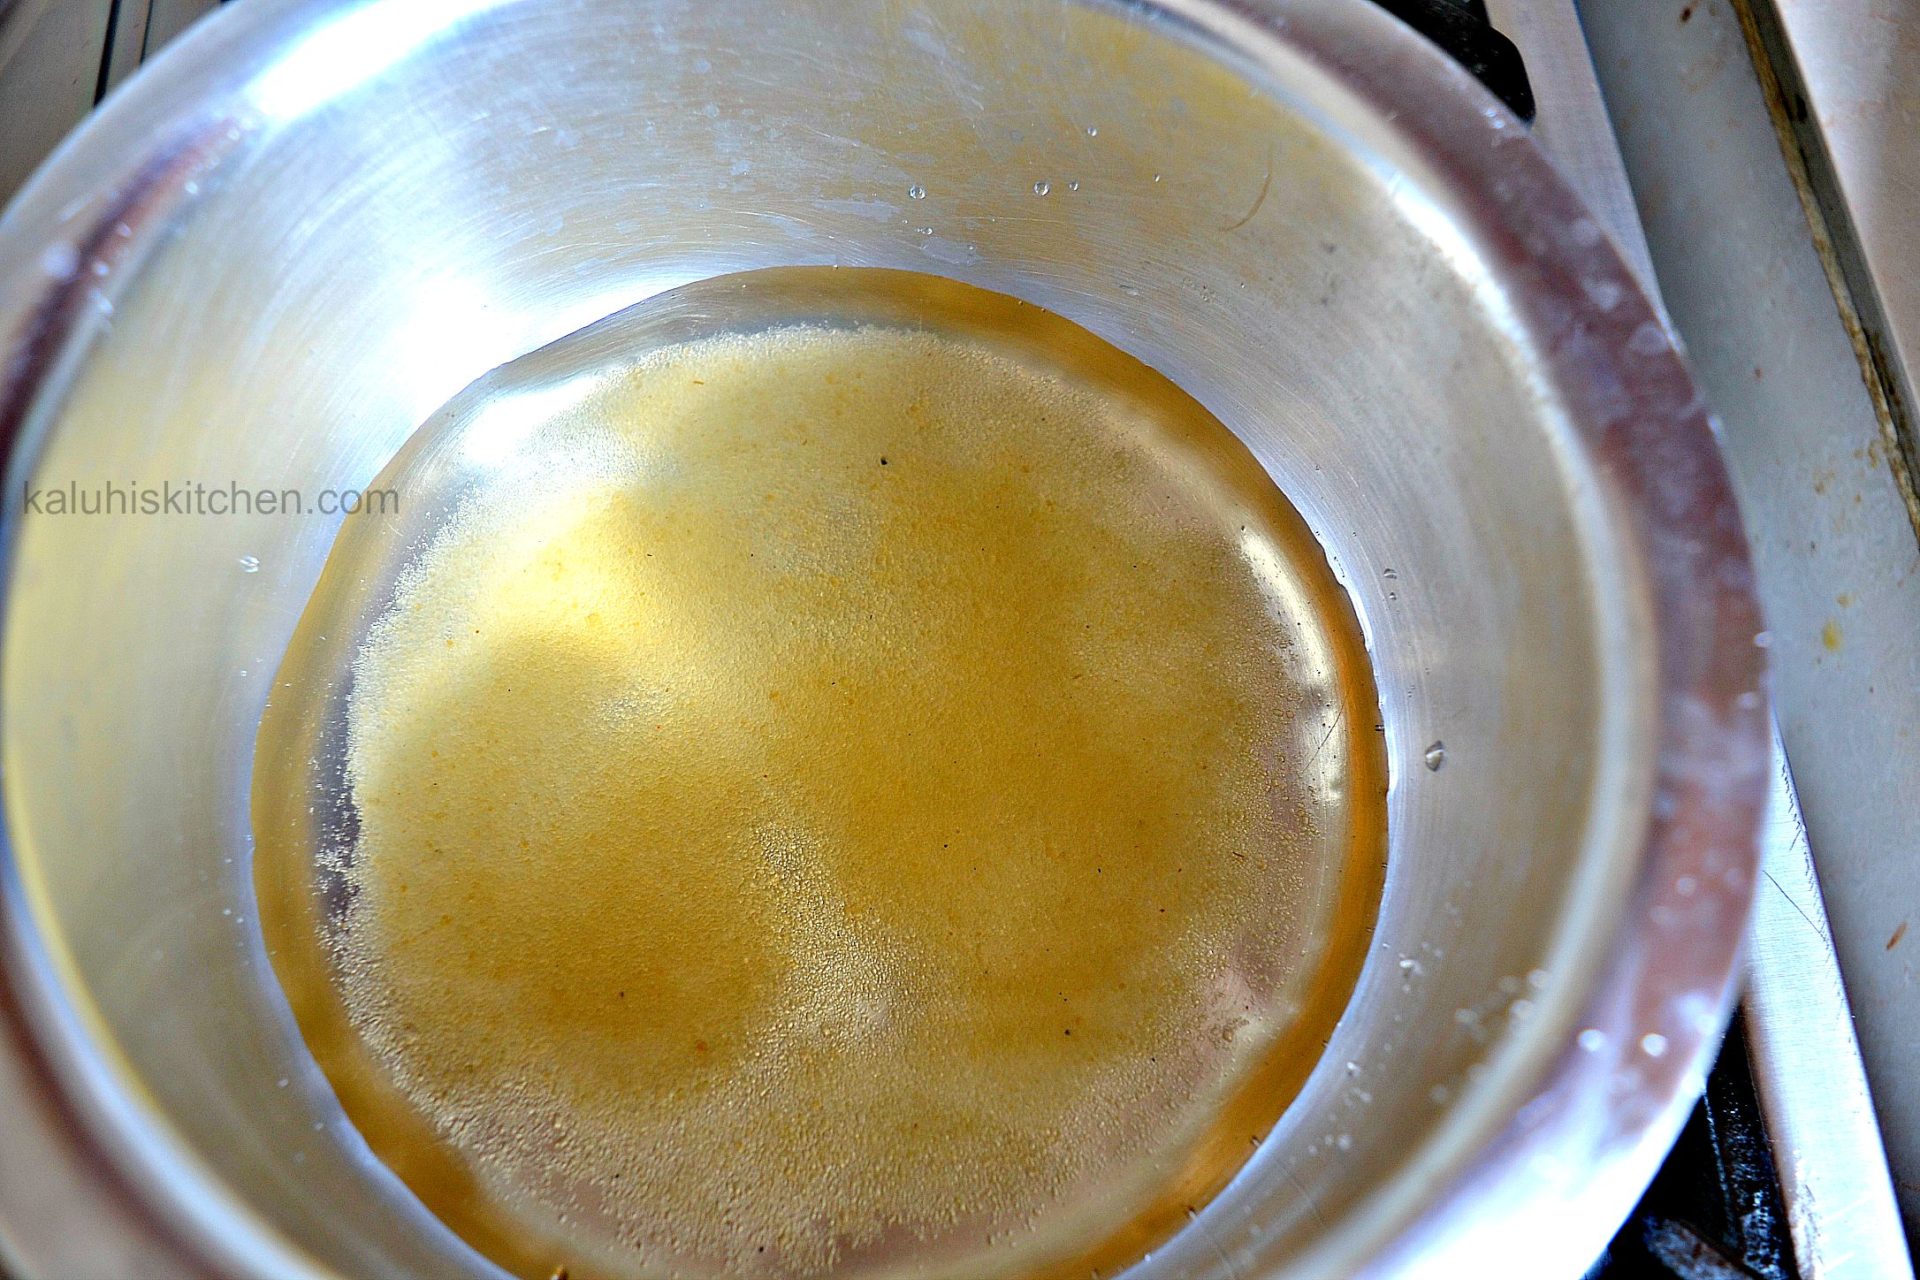 how to make a caramel_broccoli and carrots chille caramel_sugar and water.kaluhikitchen.com